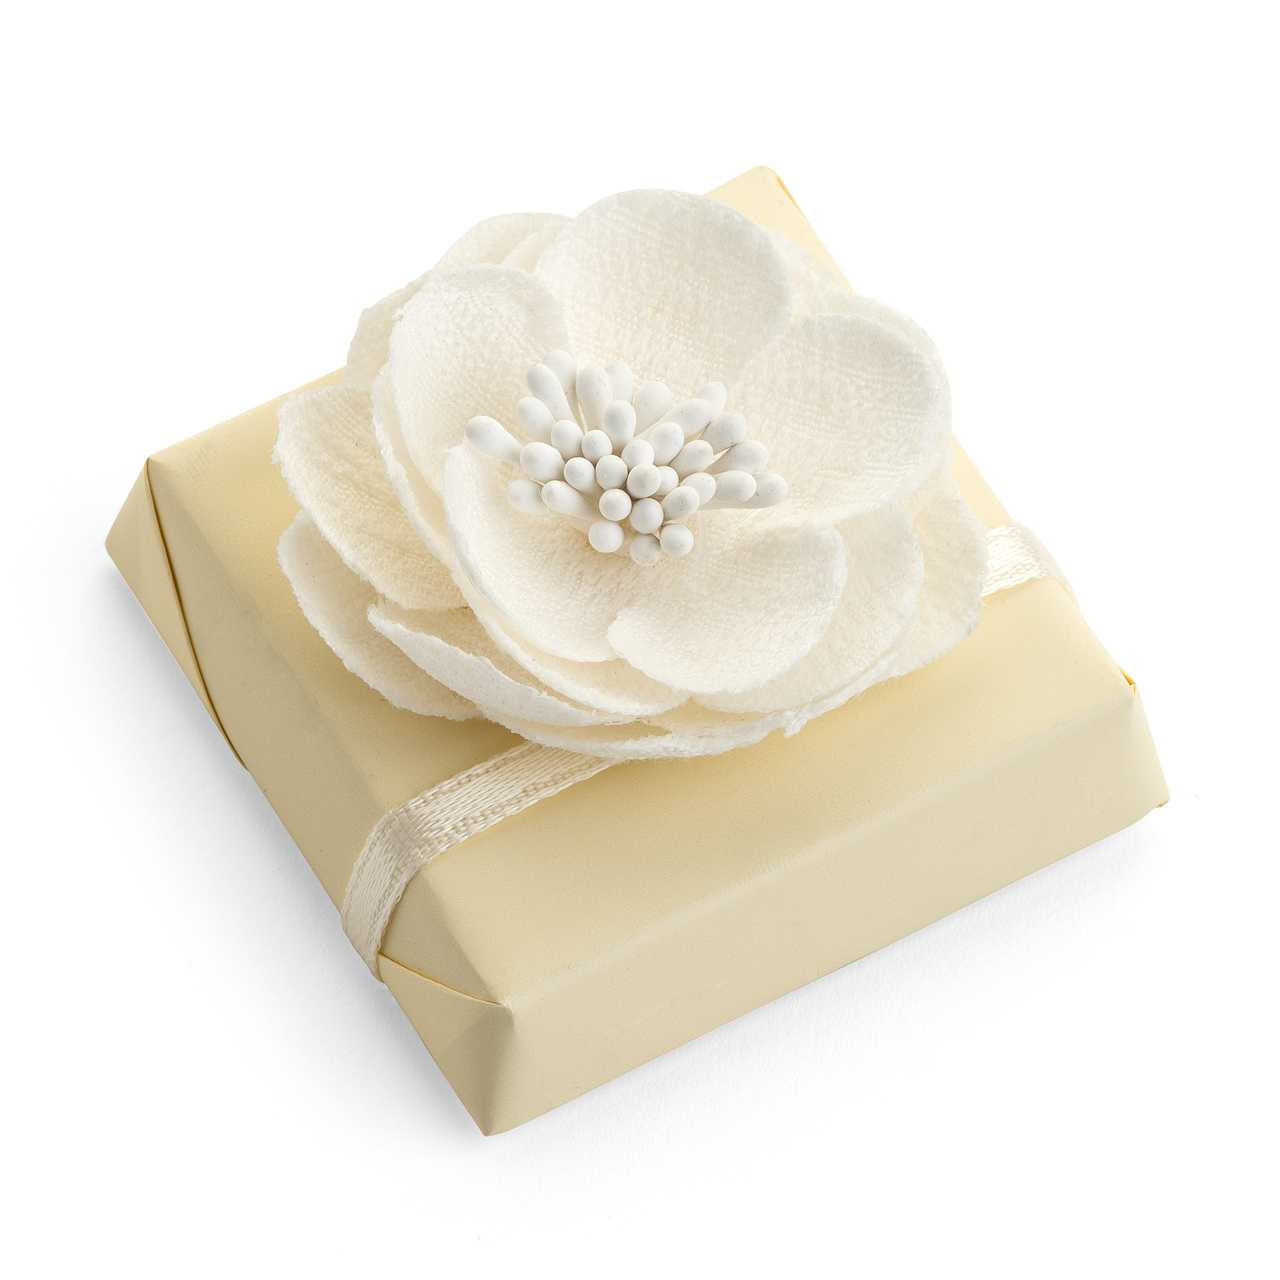 Wedding Favor Decorated Chocolate topped with Flower/Ivory-From  www.